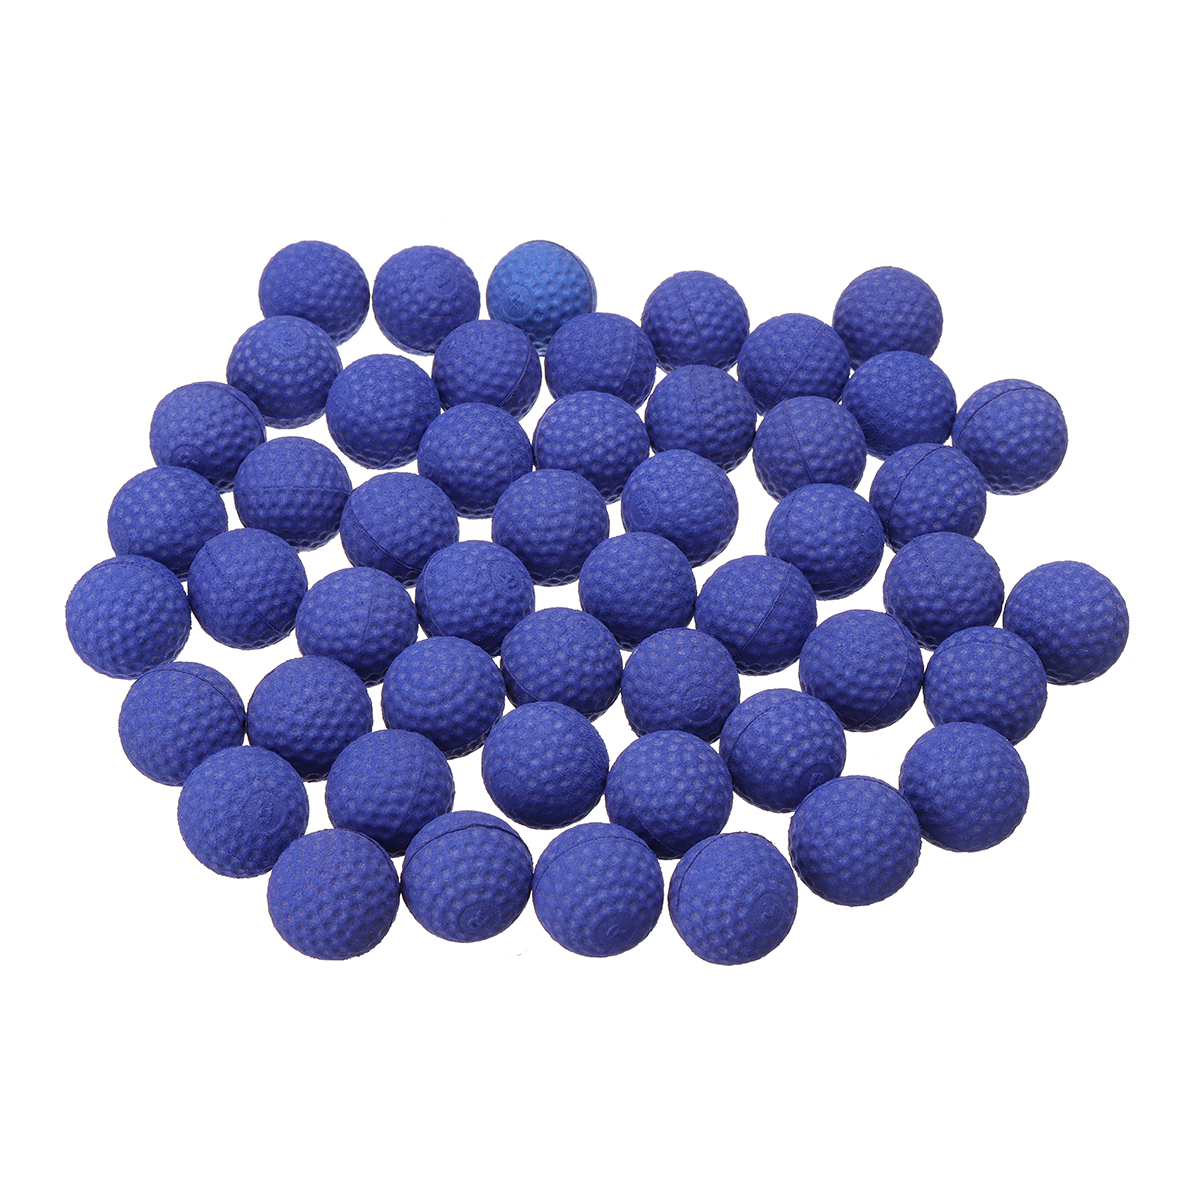 100Pcs-Bullet-Balls-Rounds-Compatible-Part-For-Nerf-Rival-Apollo-Toy-Refill-1423244